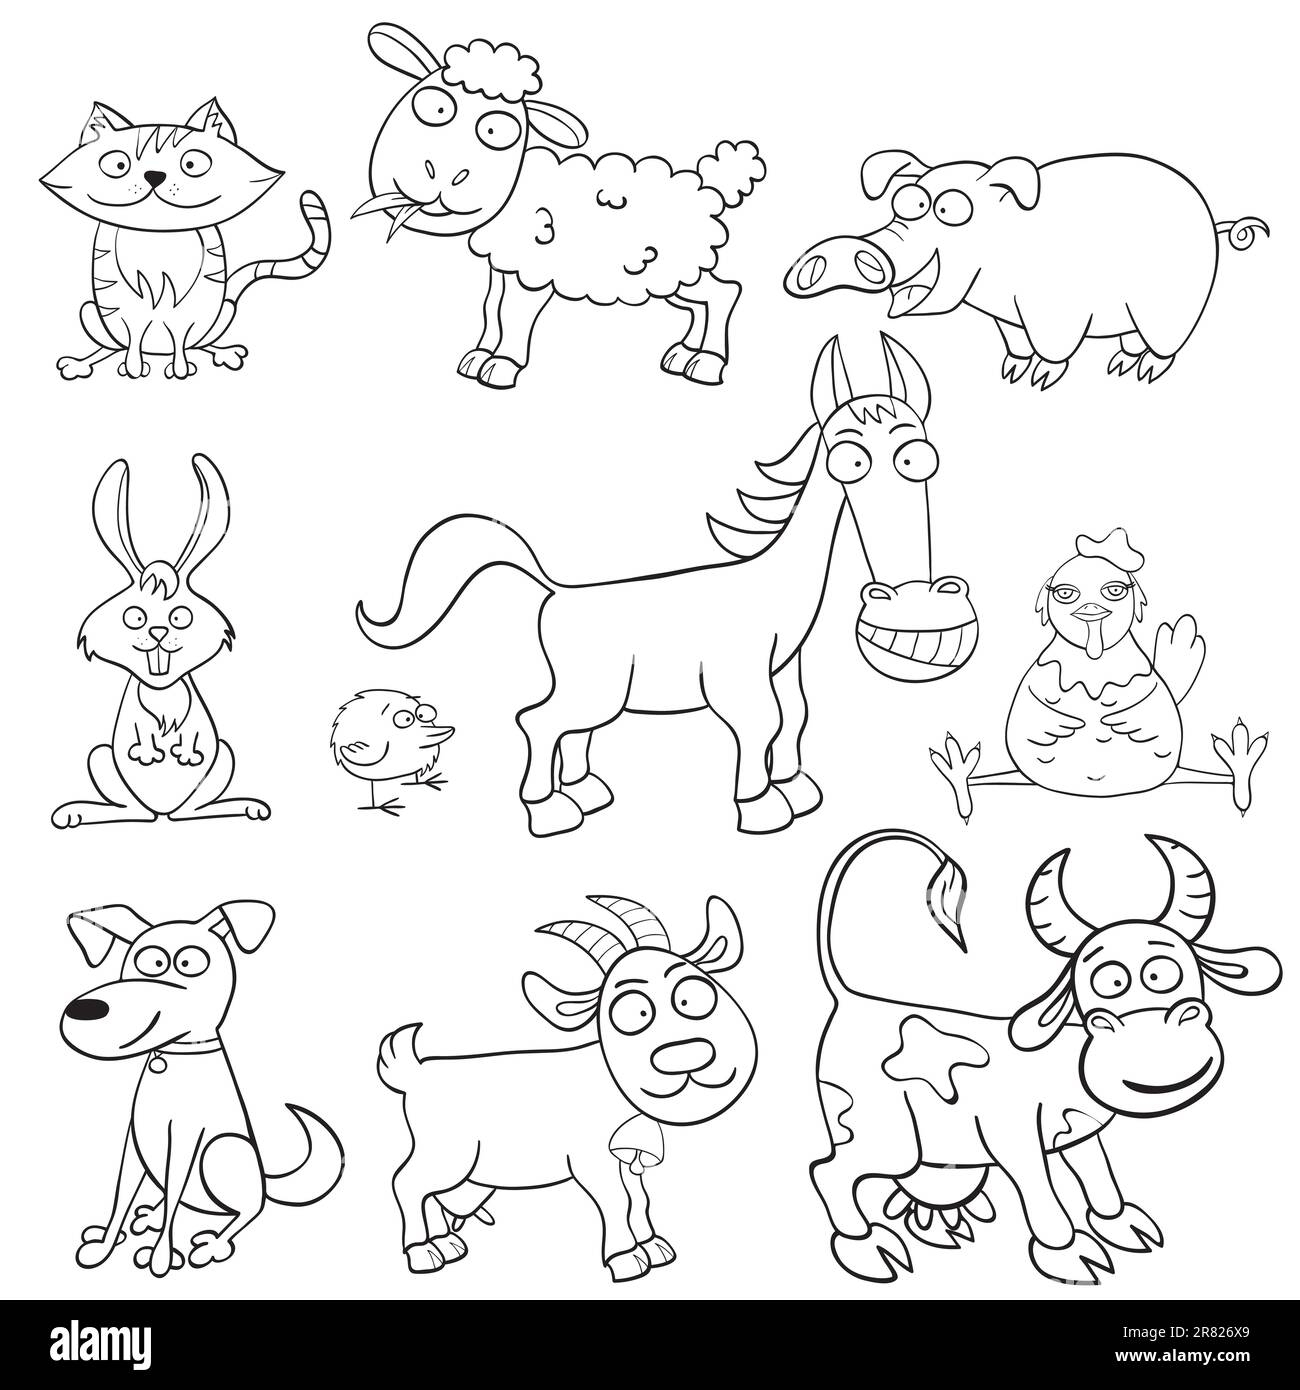 Outlined cute cartoon farm animals for coloring book. Vector illustration. Stock Vector